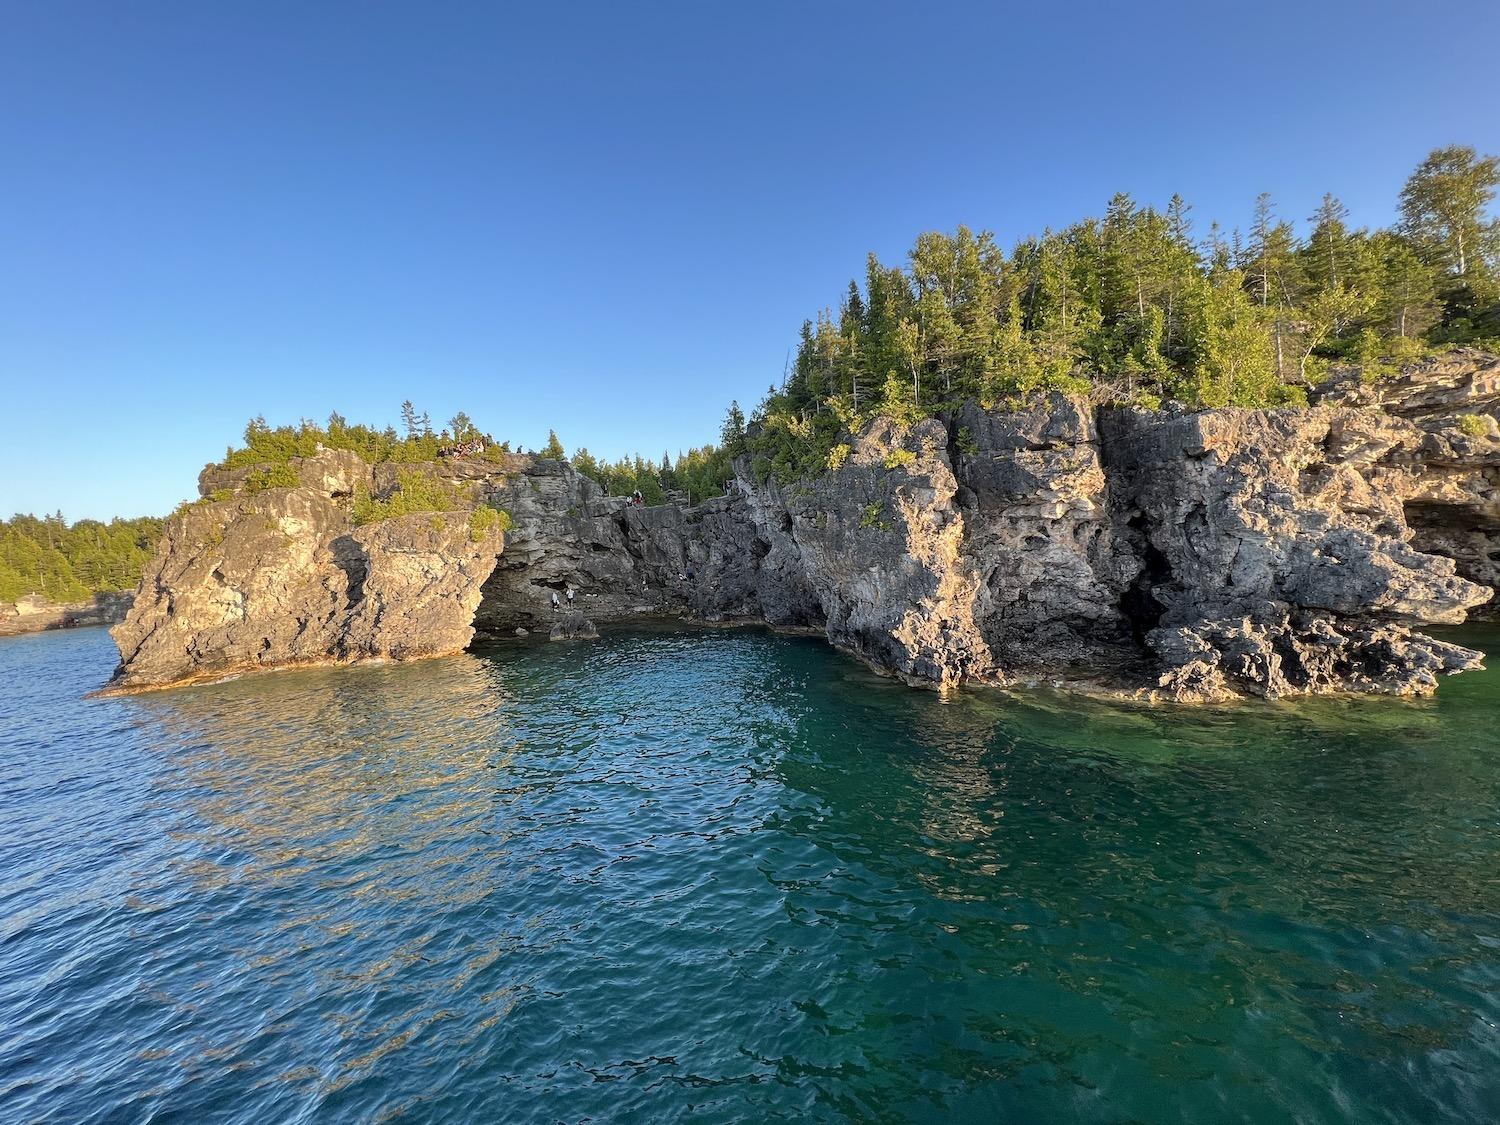 A view of people exploring the Grotto, taken from a sunset cruise along Georgian Bay.